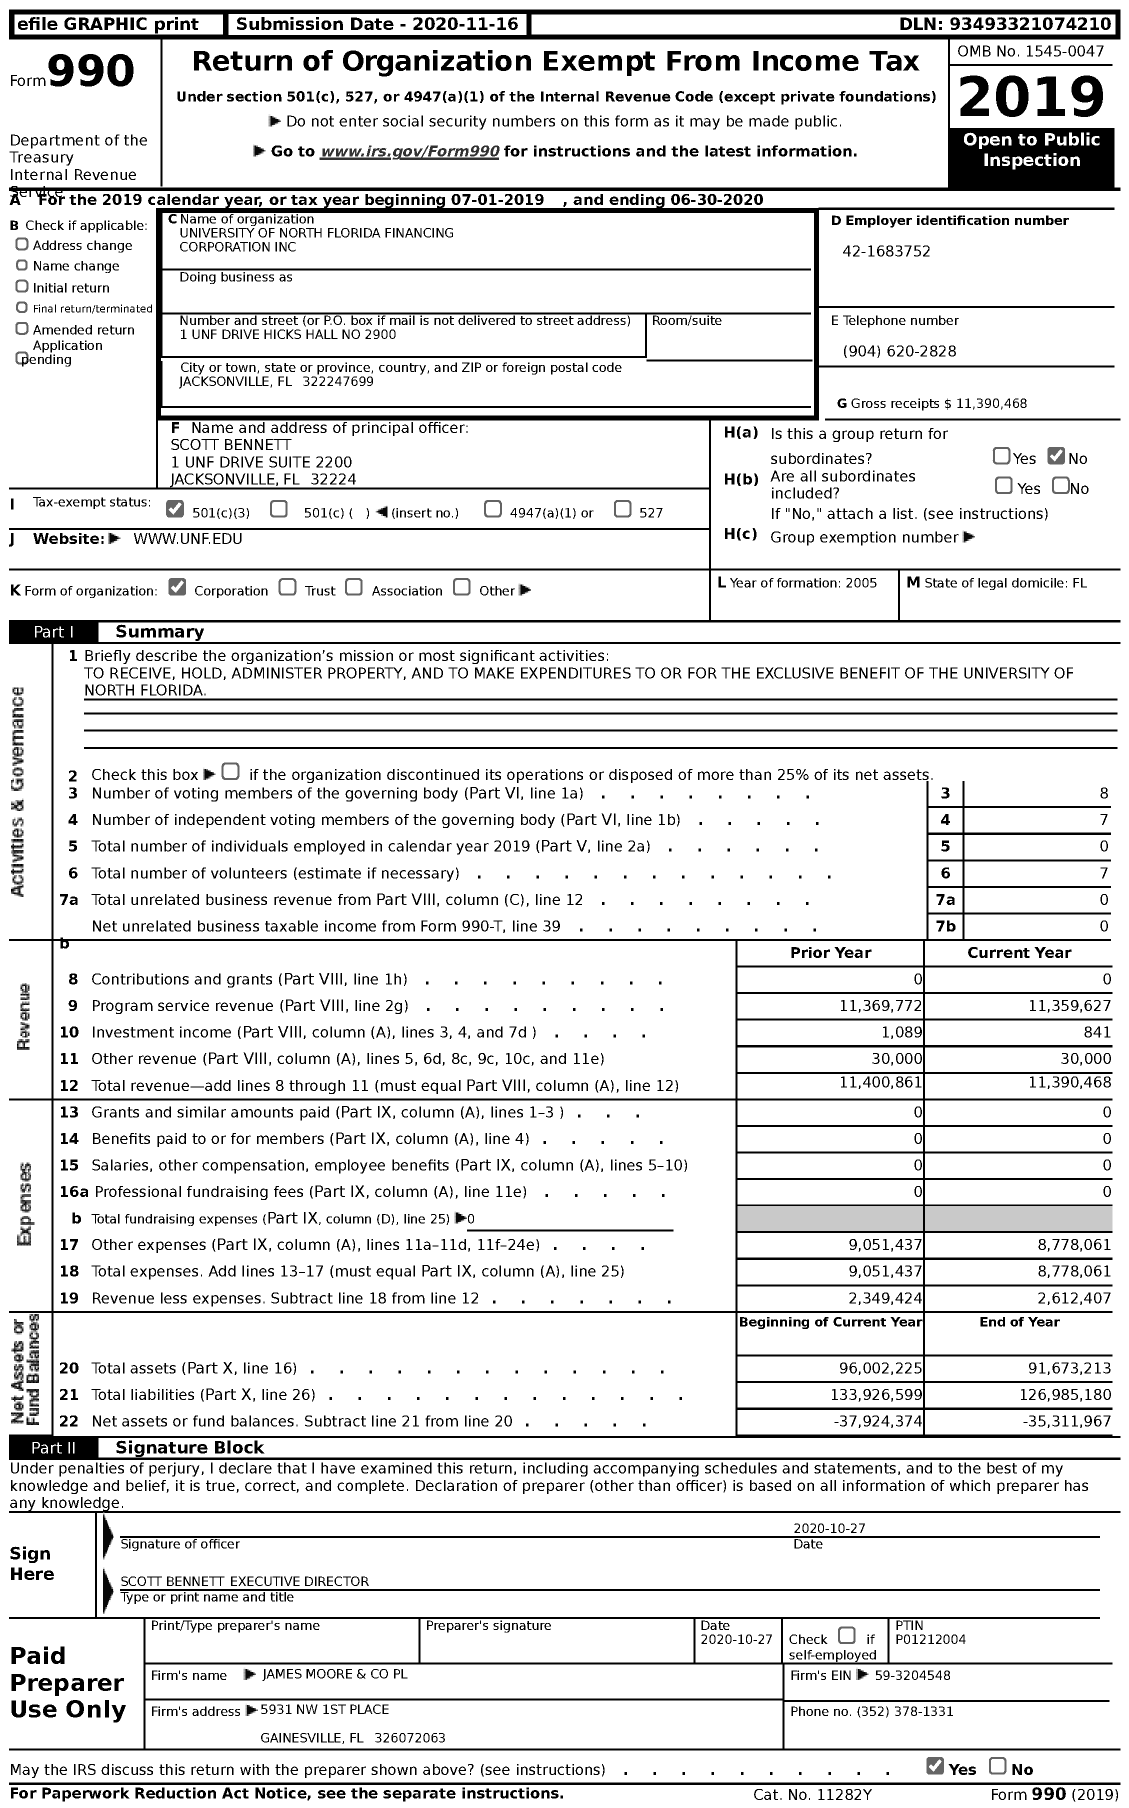 Image of first page of 2019 Form 990 for University of North Florida Financing Corporation